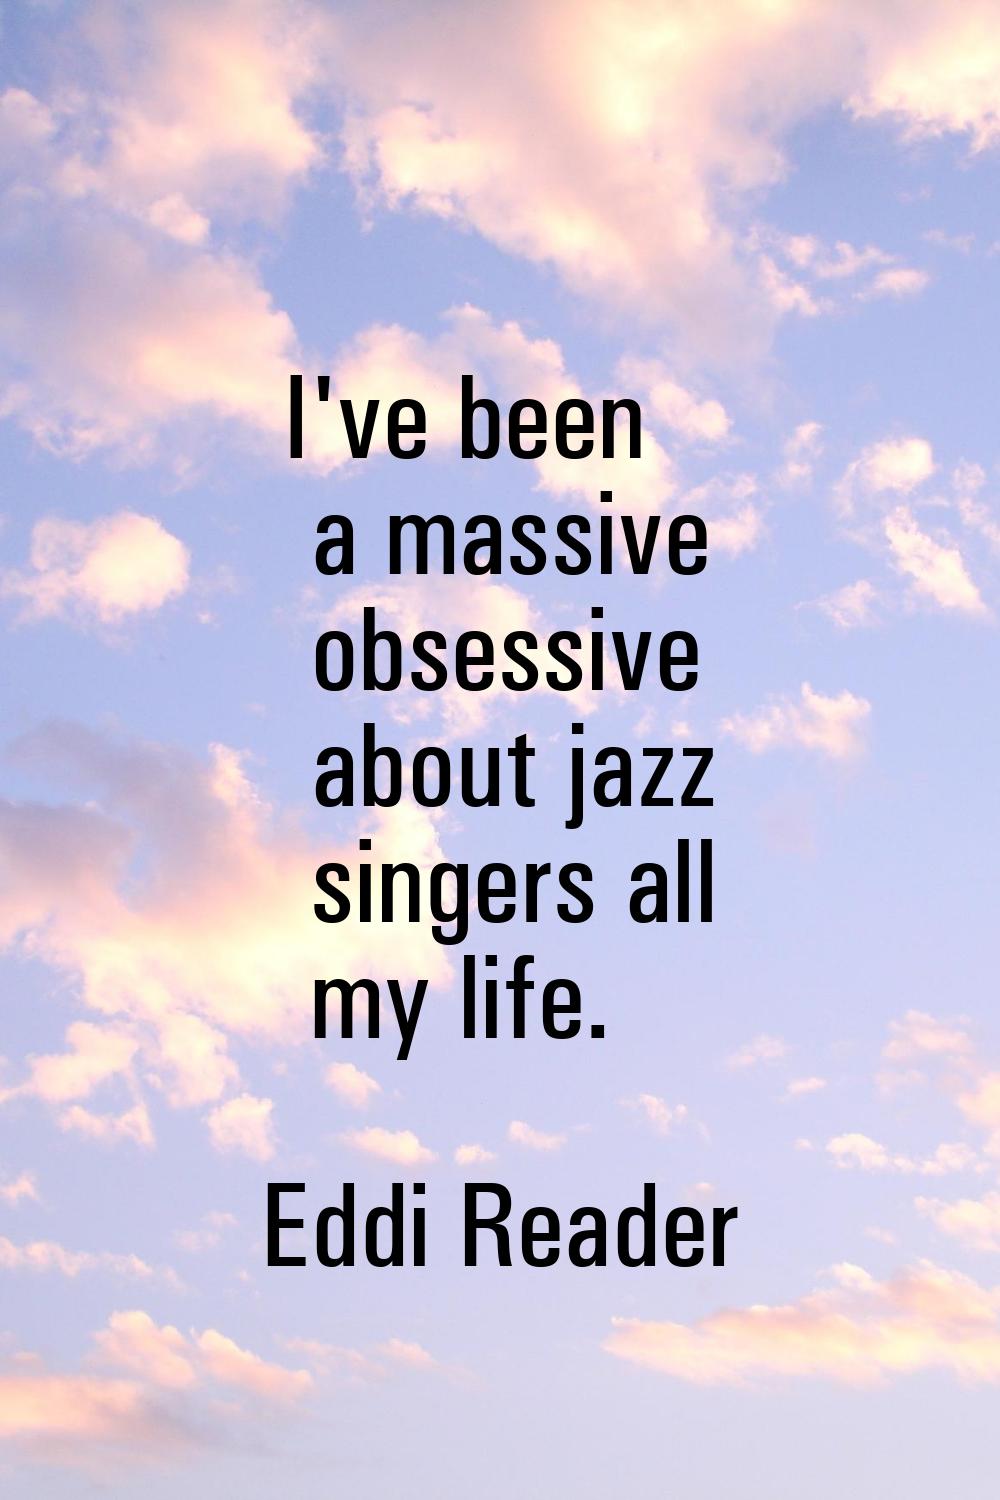 I've been a massive obsessive about jazz singers all my life.